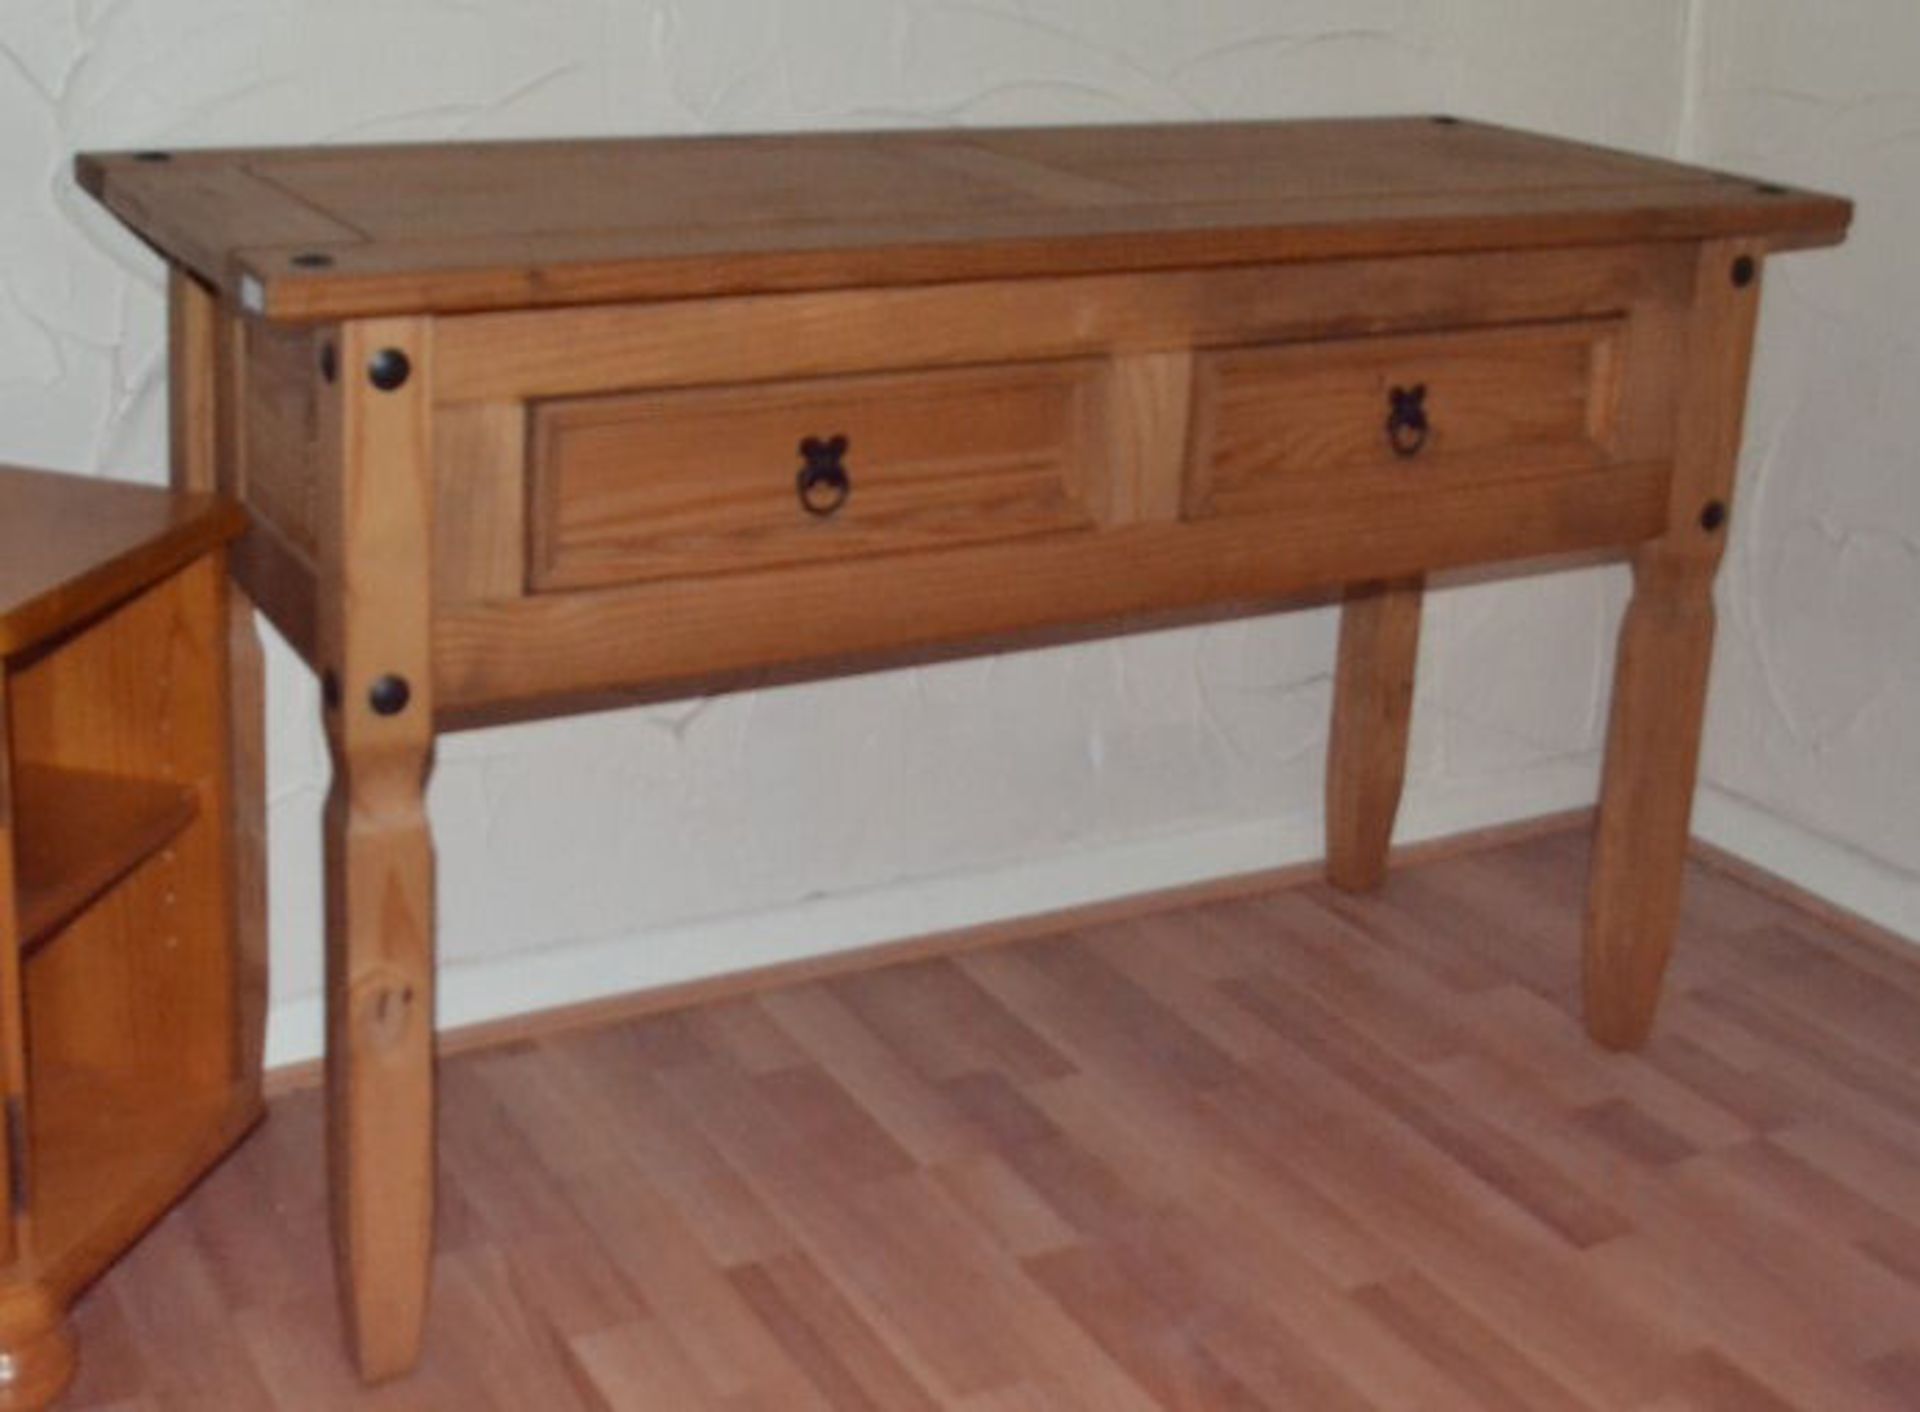 1 x Corona Mexican Pine Console Table - Image 2 of 2